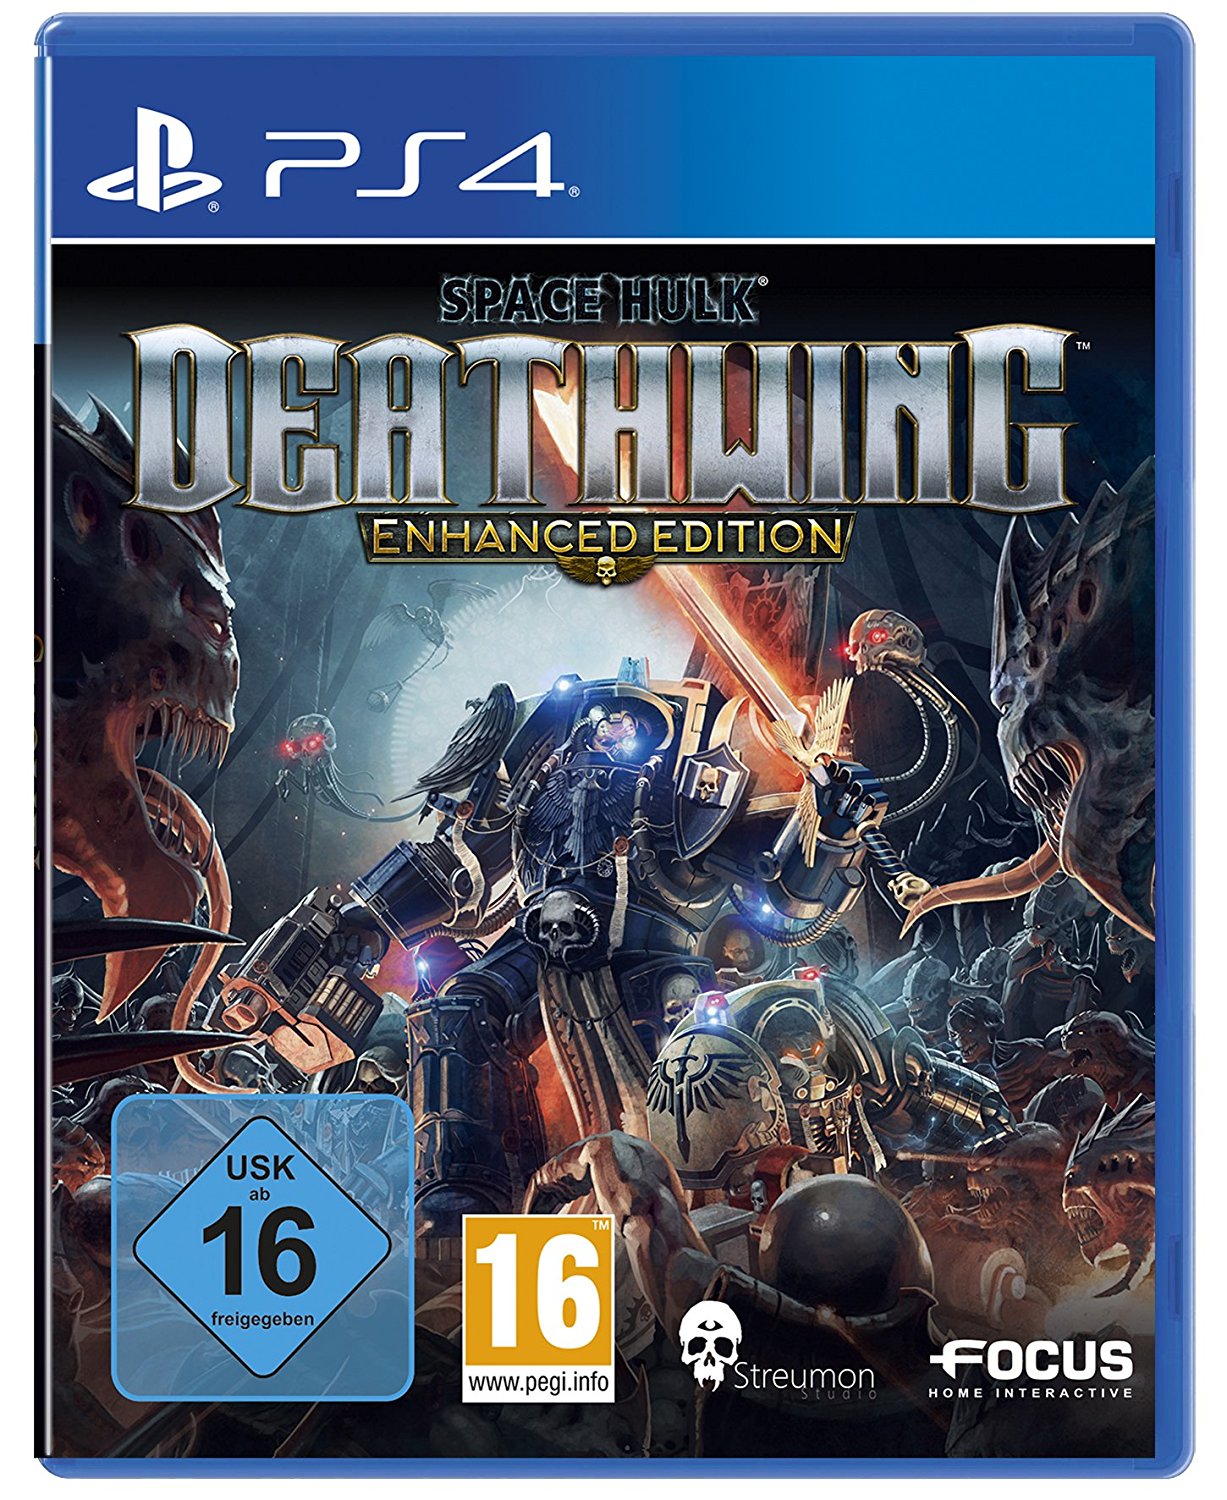 download free space hulk deathwing ps5